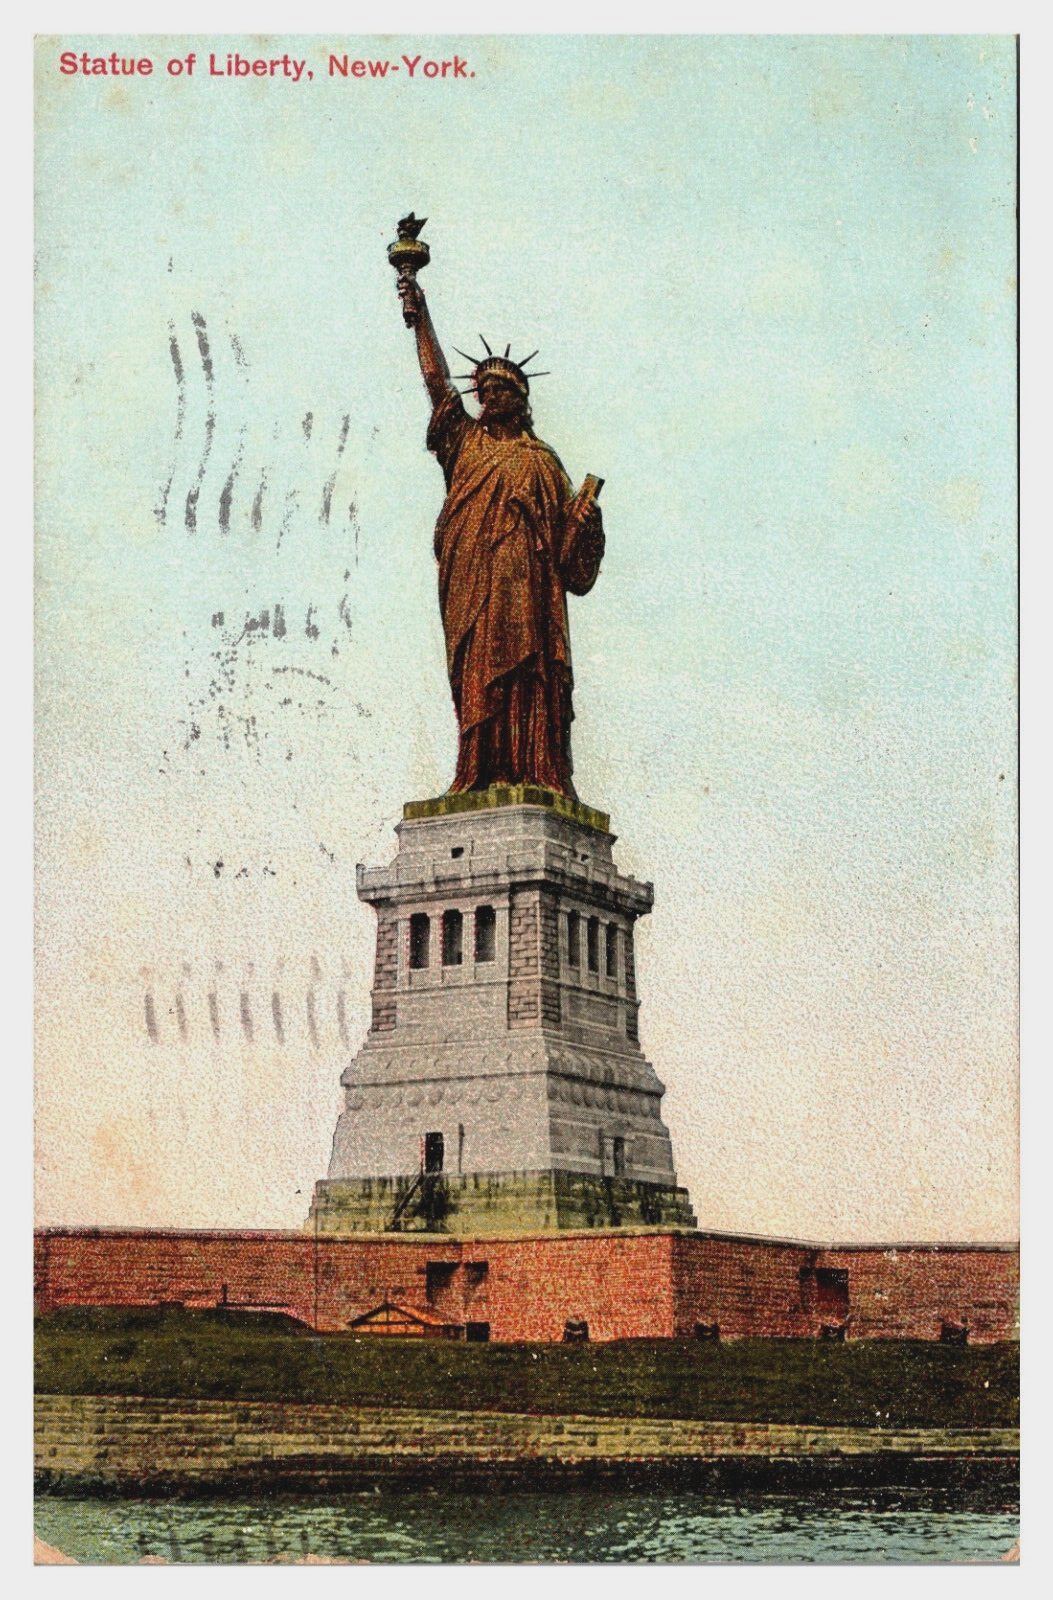 Statue of Liberty Early 1900s View New York Lithograph C 1908 Antique Postcard